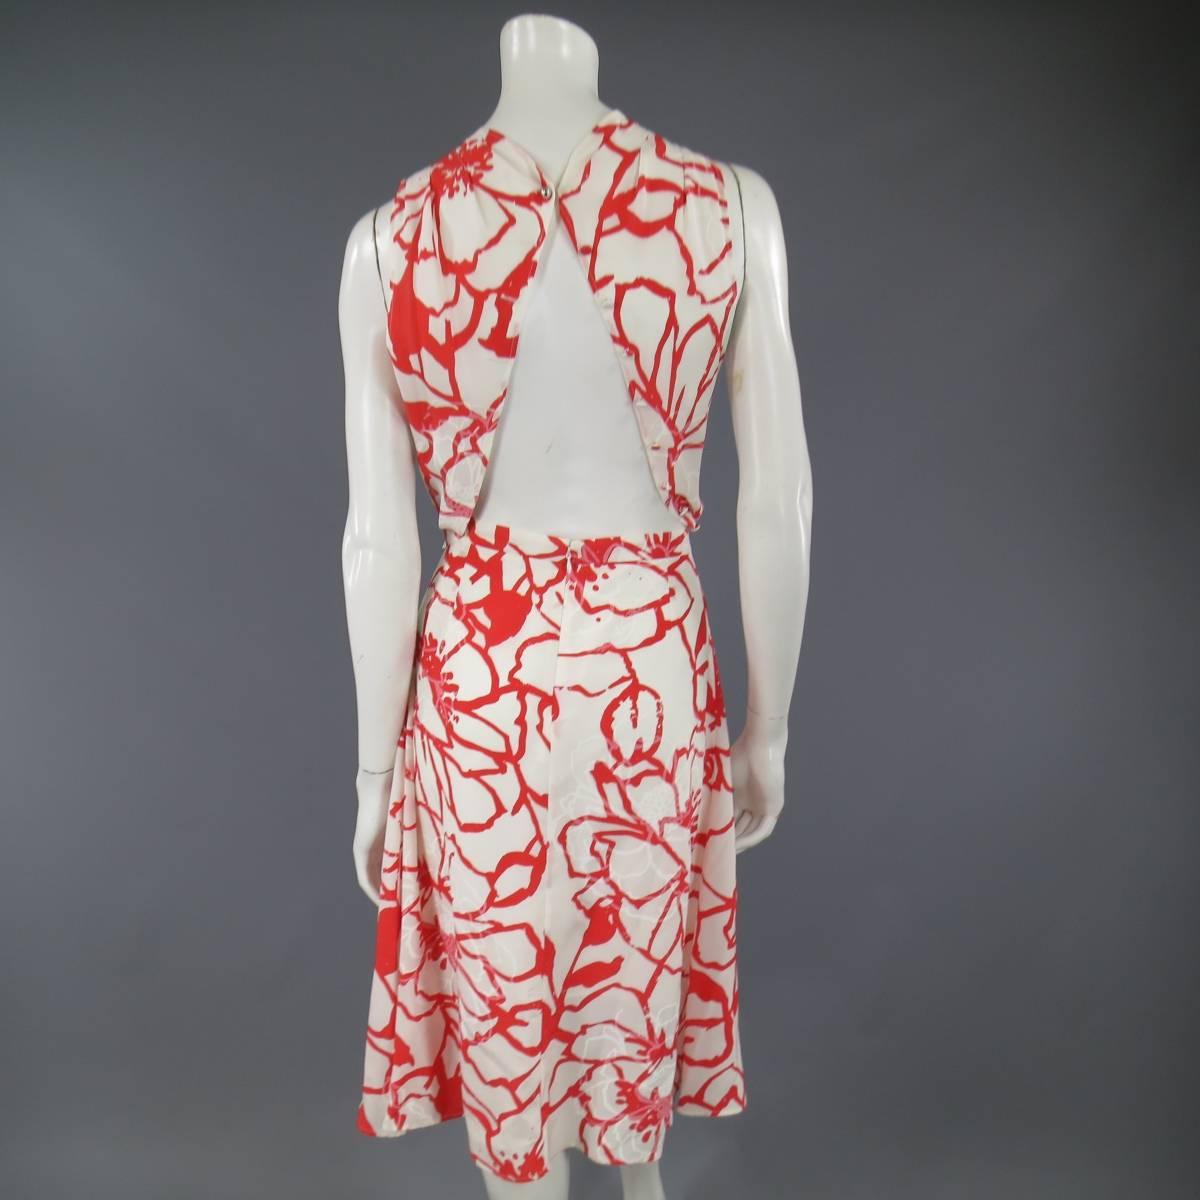 This fabulous NINNA RICCI dress comes in a white and red floral print silk and features a high neck, asymmetrical pleated drape front, a line skirt, belt, and open back with faux button closures. Made in France.
 
Excellent Pre-Owned